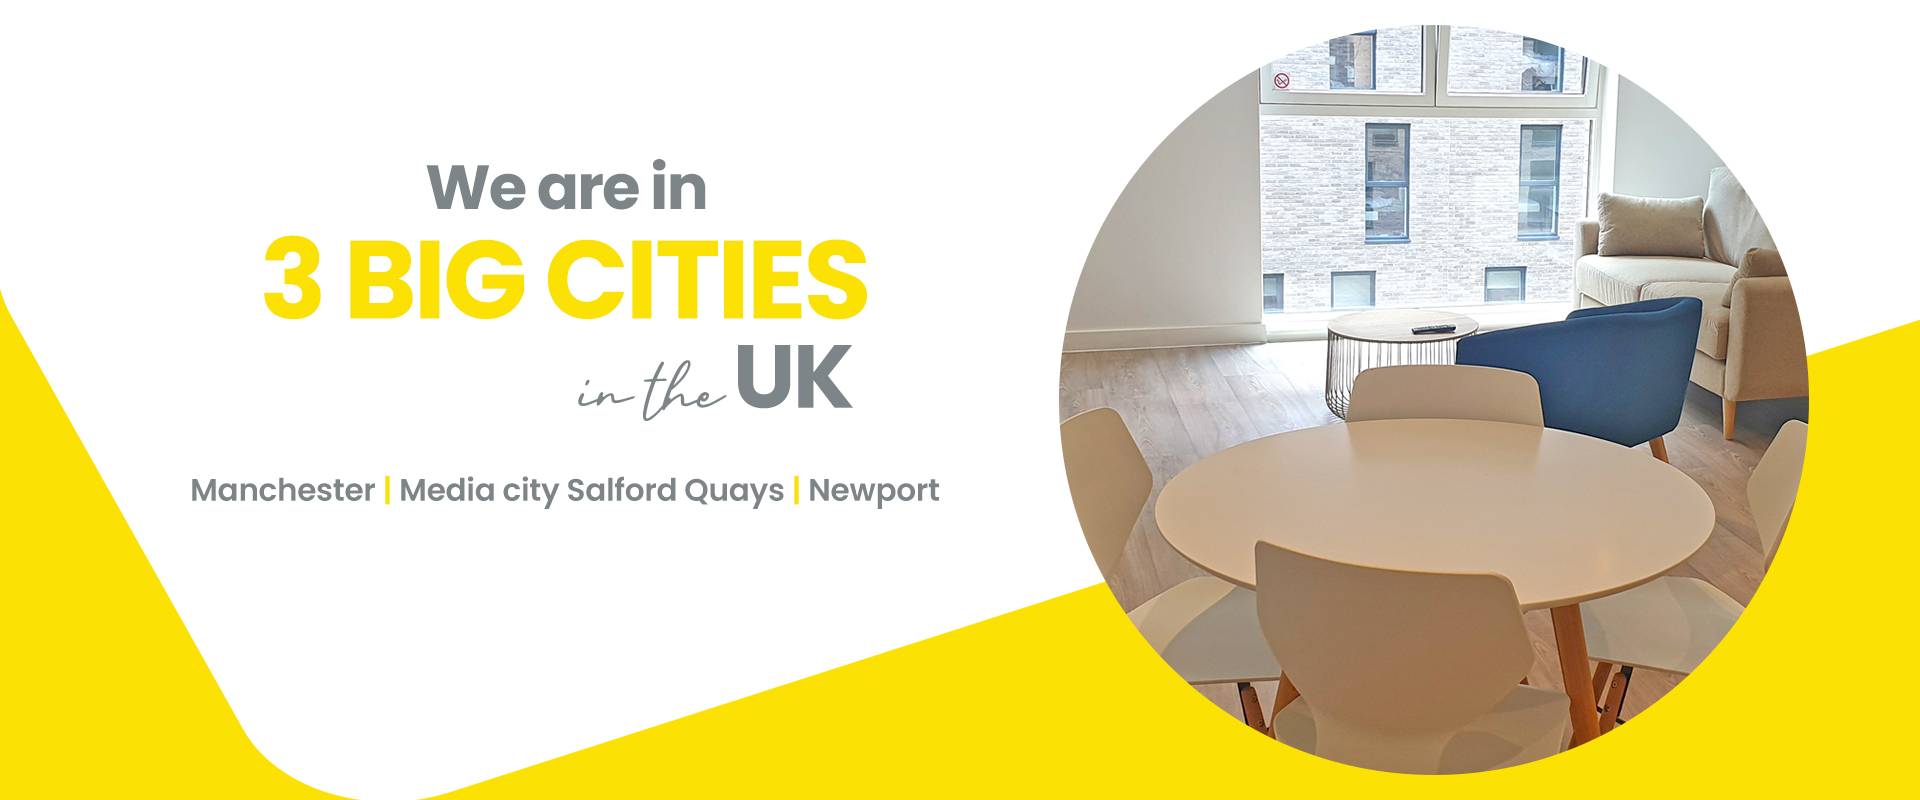 No.1 Cheap Hotels Salford Quays | Hotels in Salford Manchester